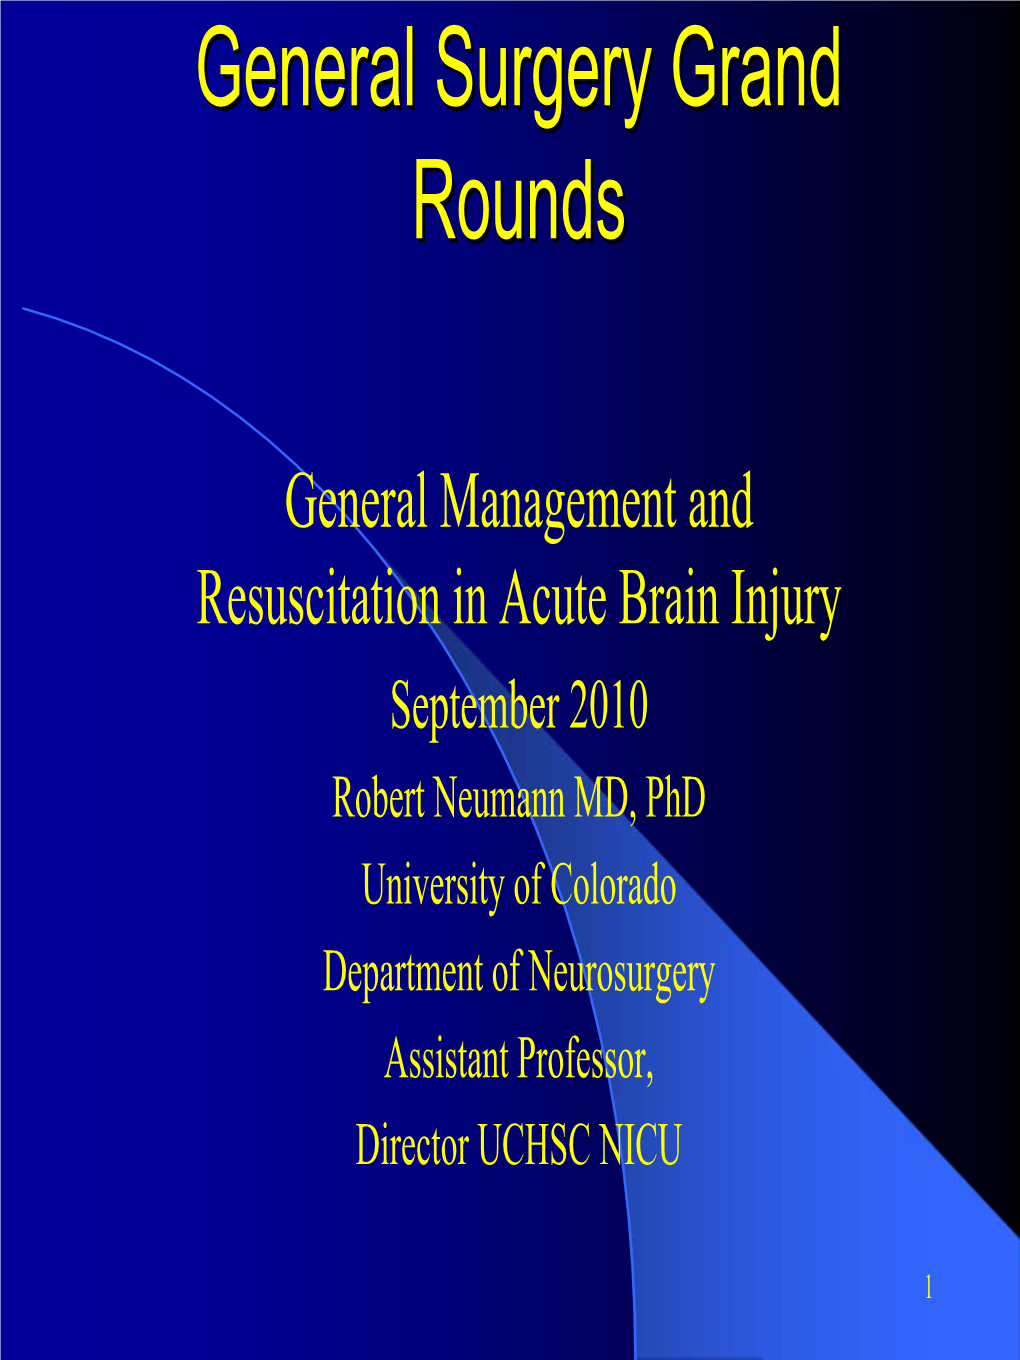 General Management and Resuscitation in Acute Brain Injury